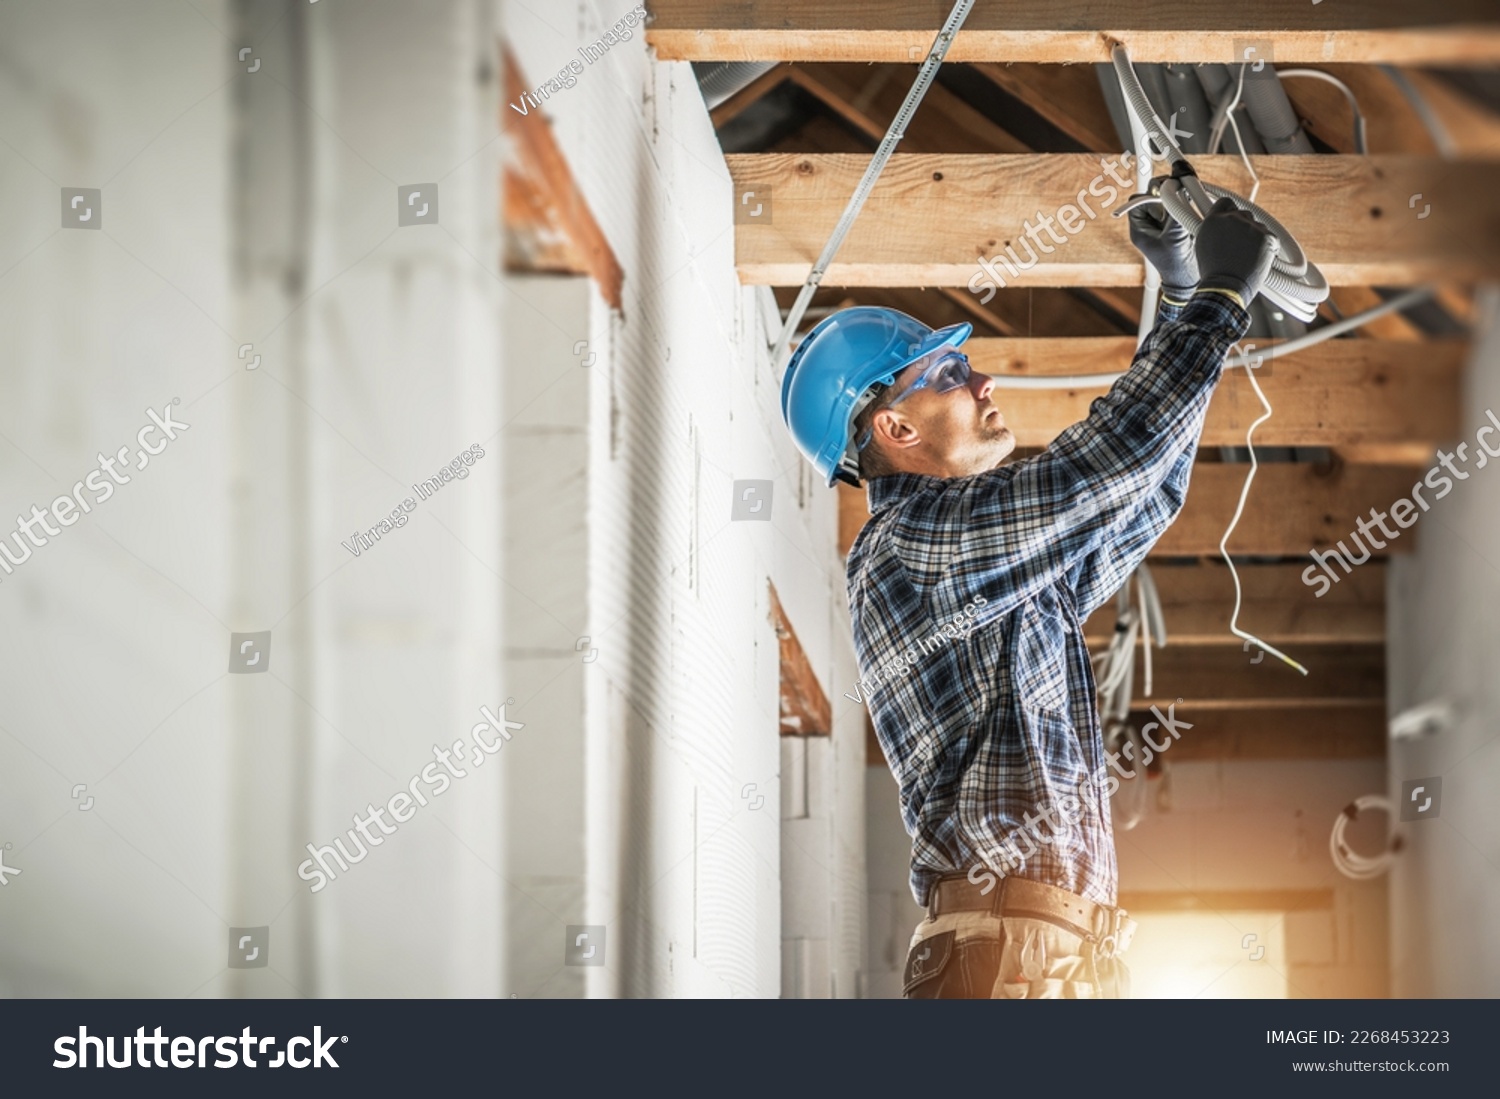 Professional Caucasian Electrician Working on Electrical Wiring System Installation in New Residential House Ceiling. #2268453223